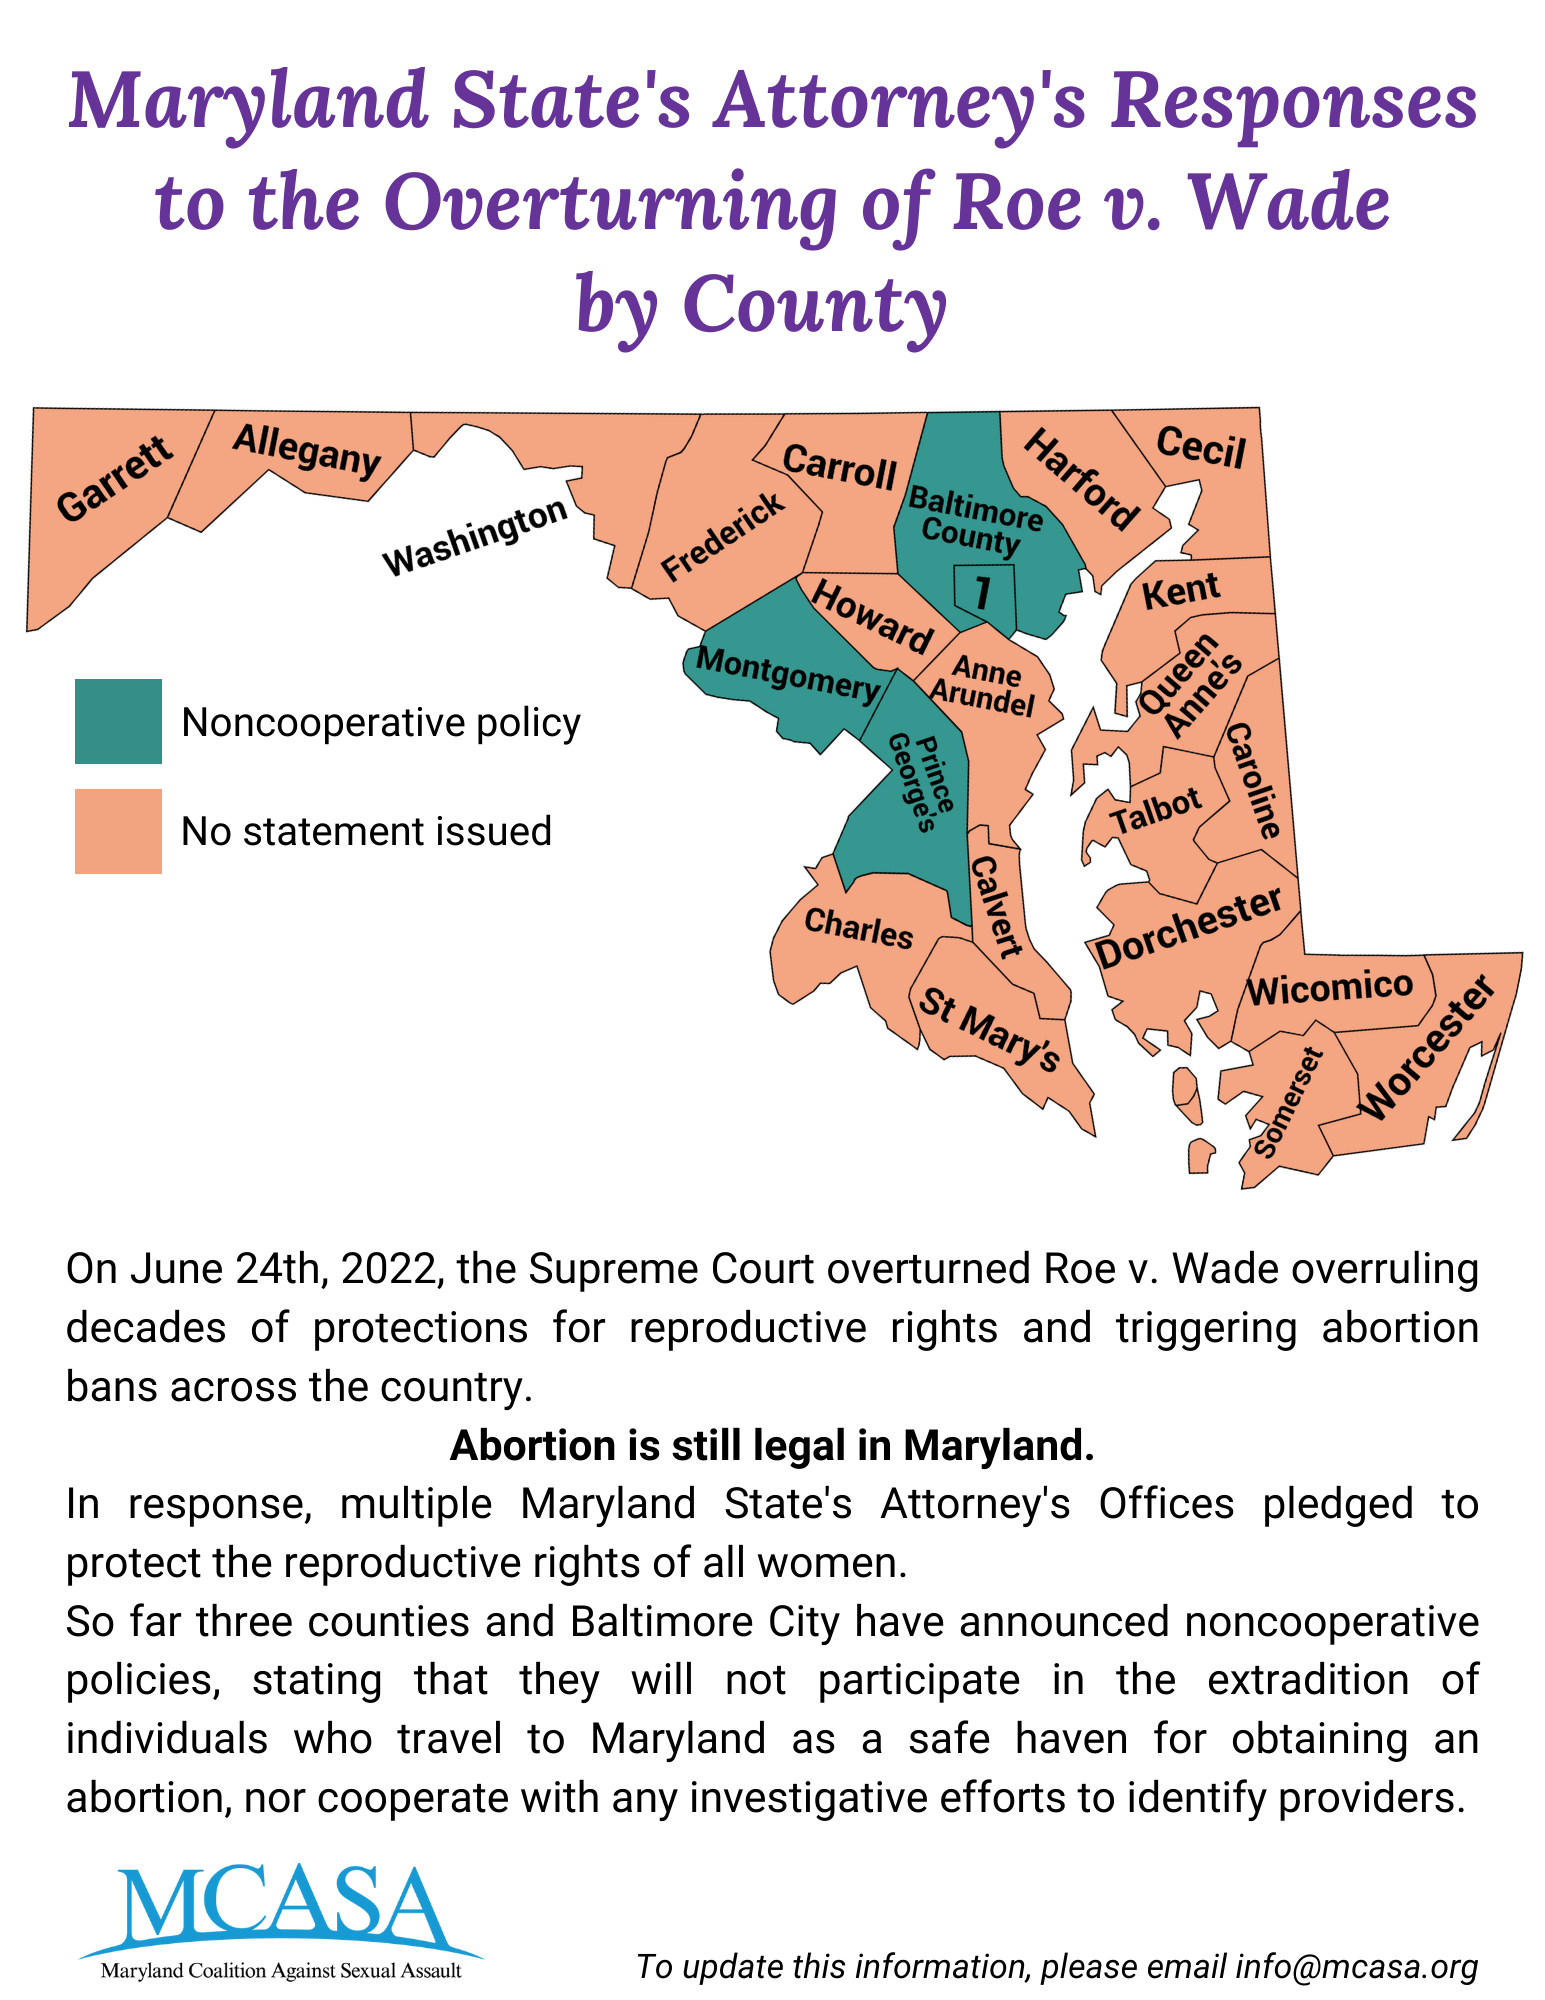 Map of Maryland counties with Montgomery, Prince George's, Baltimore, and Baltimore City highlighted.. Title reads: Maryland State's Attorney's Responses to the Overturning of Roe v. Wade by County. On June 24th, 2022, the Supreme Court overturned Roe v. Wade overruling decades of protections for reproductive rights and triggering abortion bans across the country.  Abortion is still legal in Maryland. In response, multiple Maryland State's Attorney's Offices pledged to protect the reproductive rights of all women. So far three counties and Baltimore City have announced noncooperative policies, stating that they will not participate in the extradition of individuals who travel to Maryland as a safe haven for obtaining an abortion, nor cooperate with any investigative efforts to identify providers.